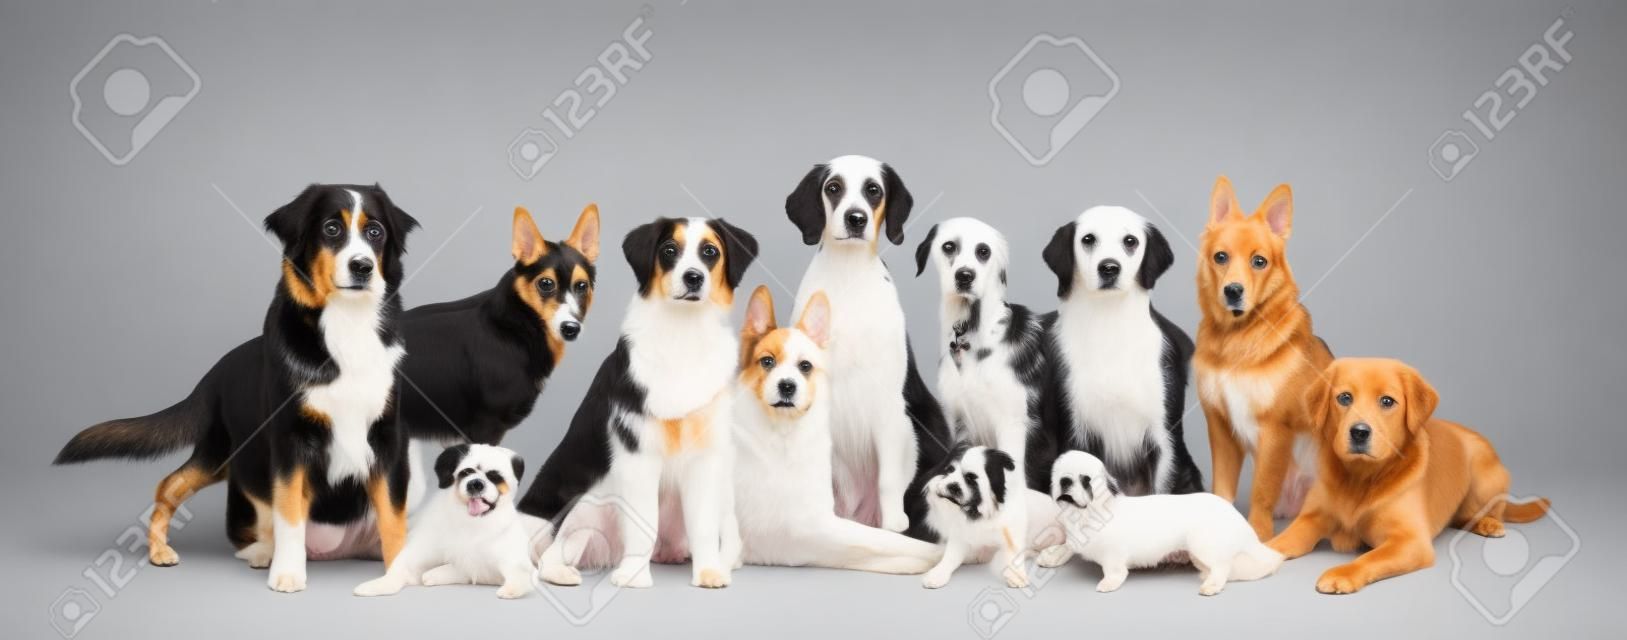 Many different dog breeds in front of white background, isolated